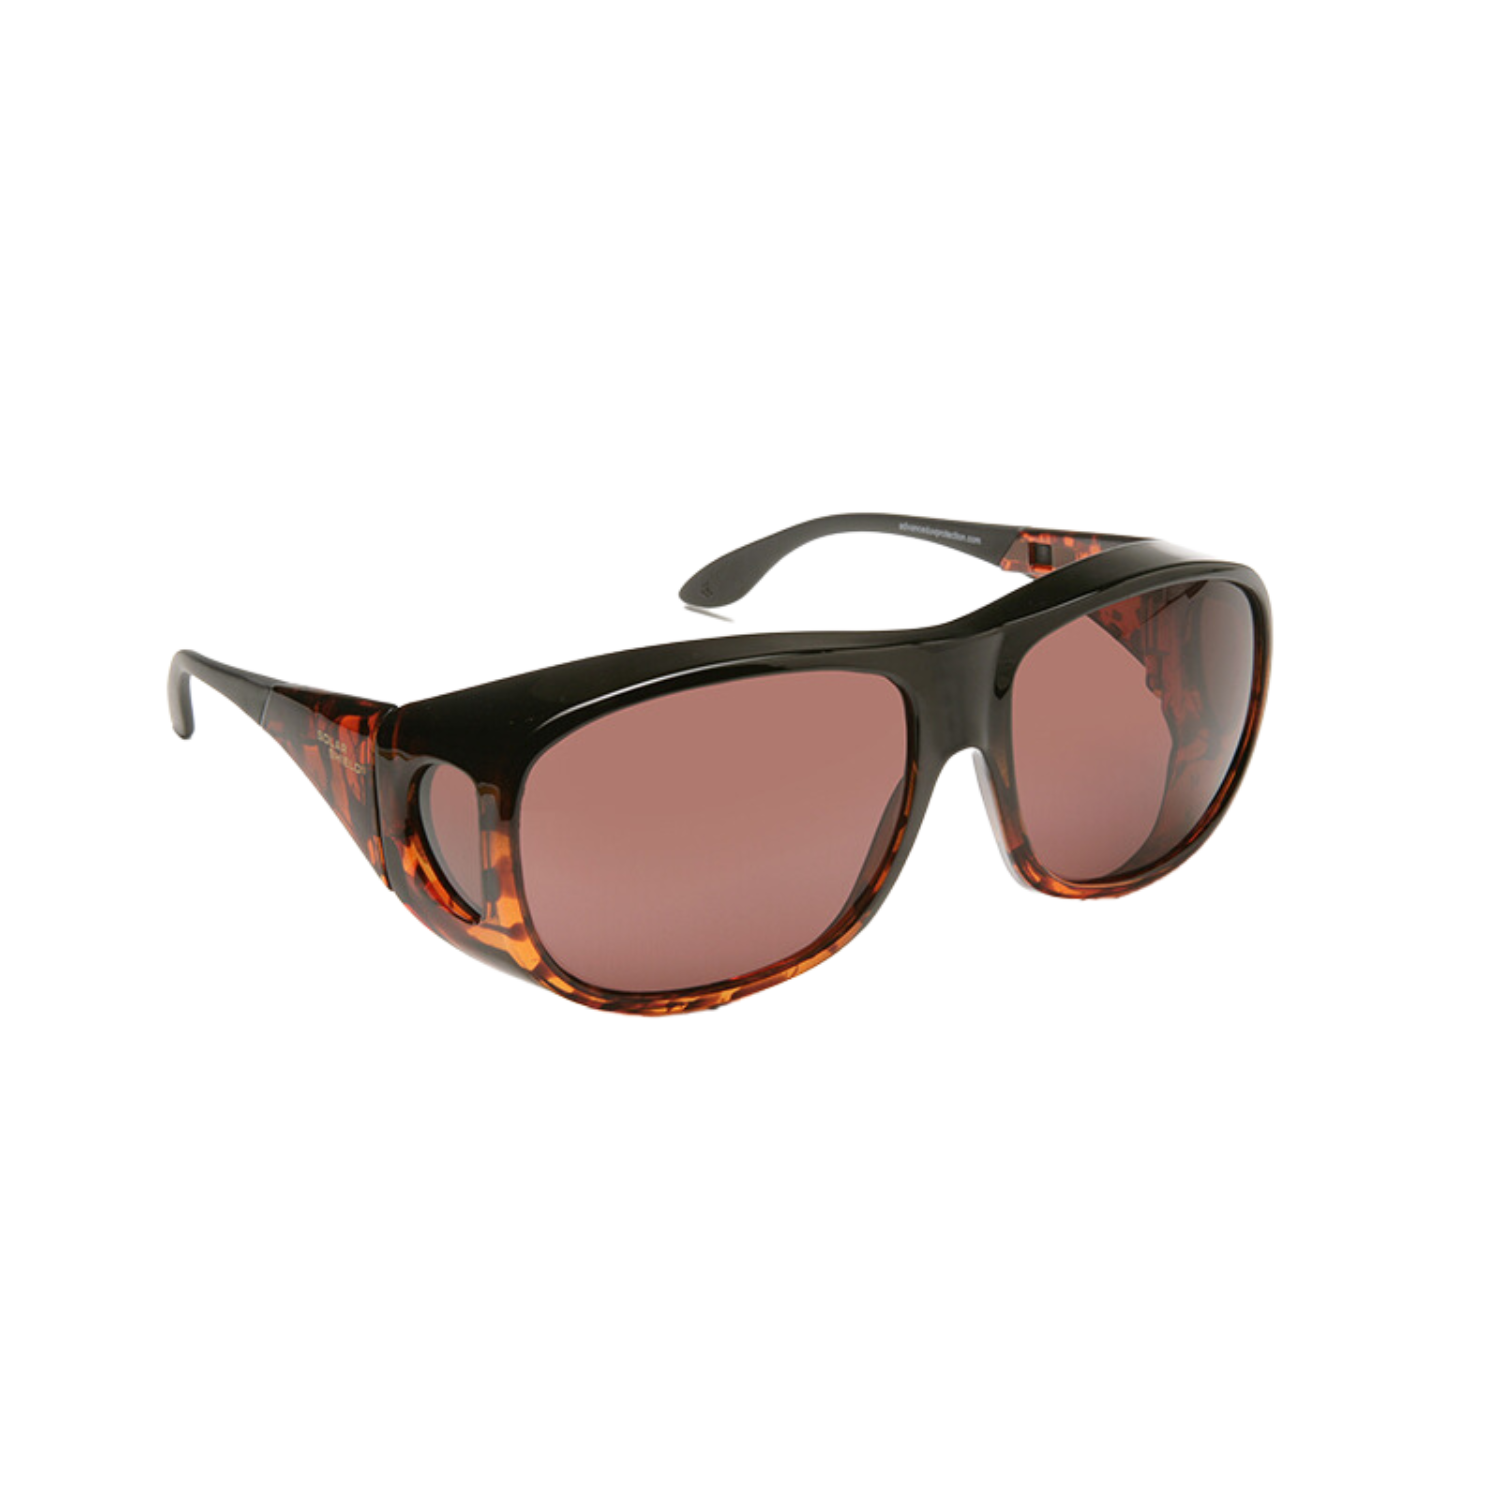 Image of the Solar Shield® Blue Light Sunglasses with Plum Tint.